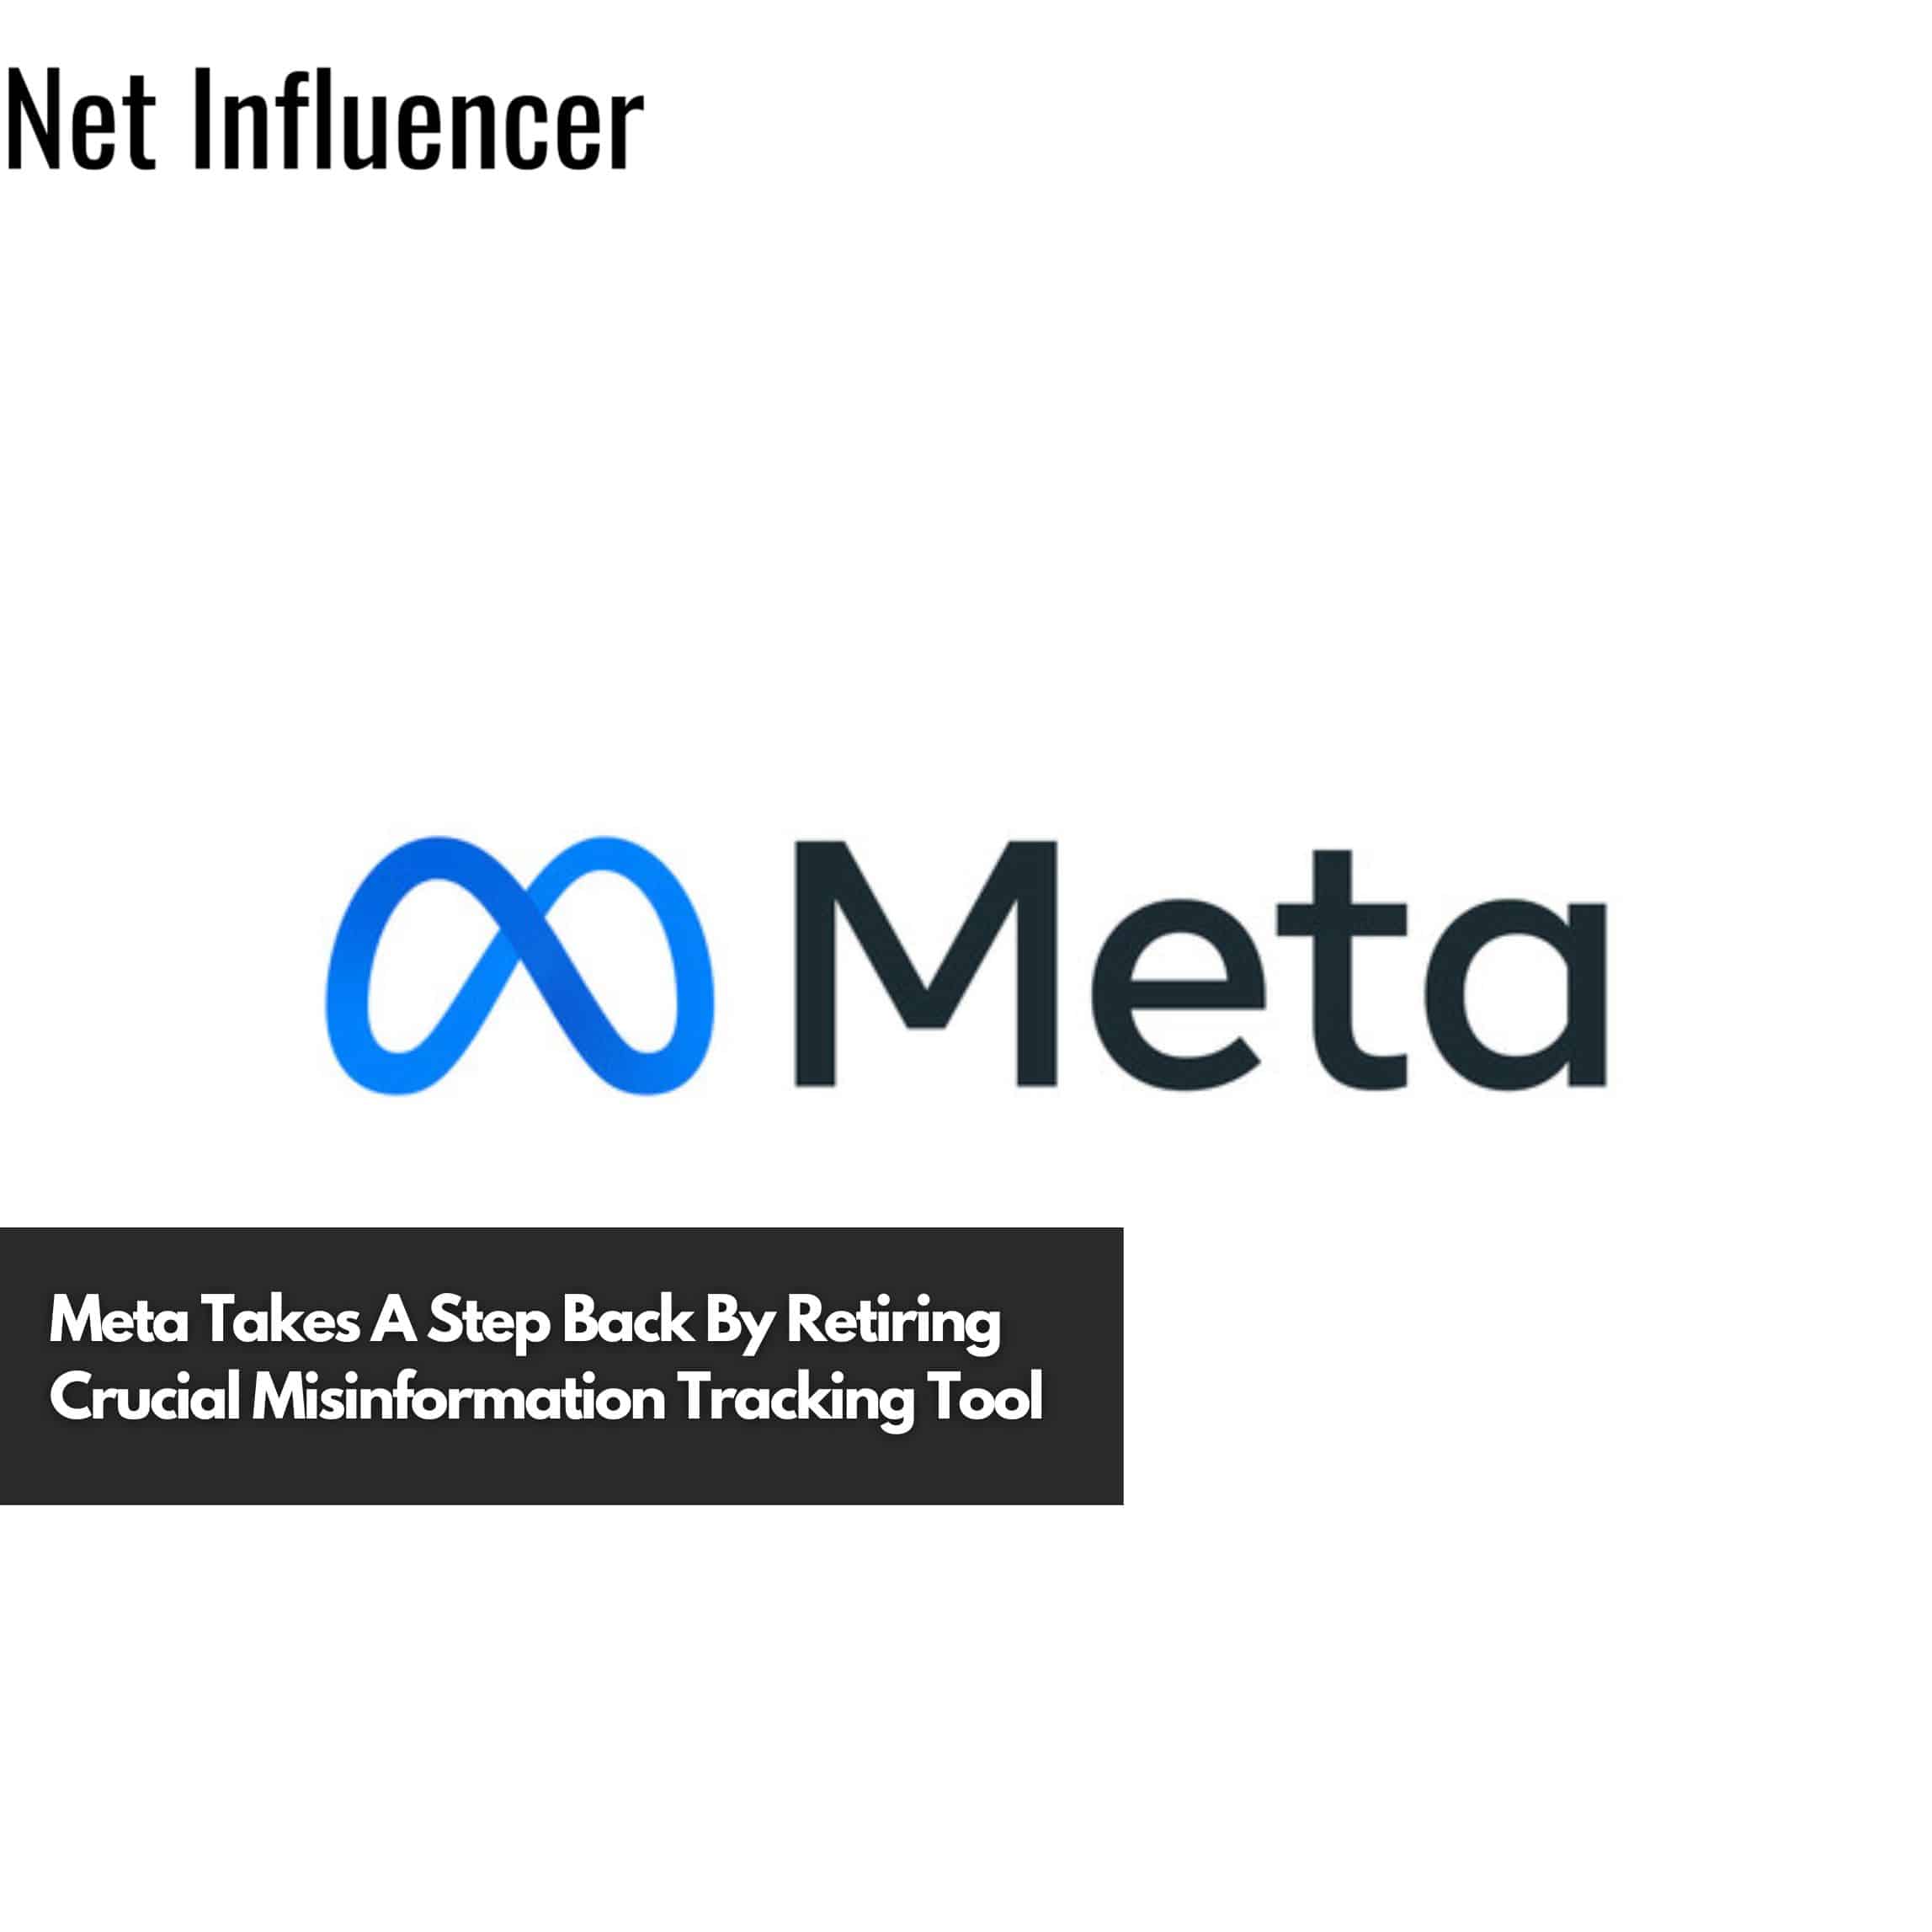 Meta Takes A Step Back By Retiring Crucial Misinformation Tracking Tool